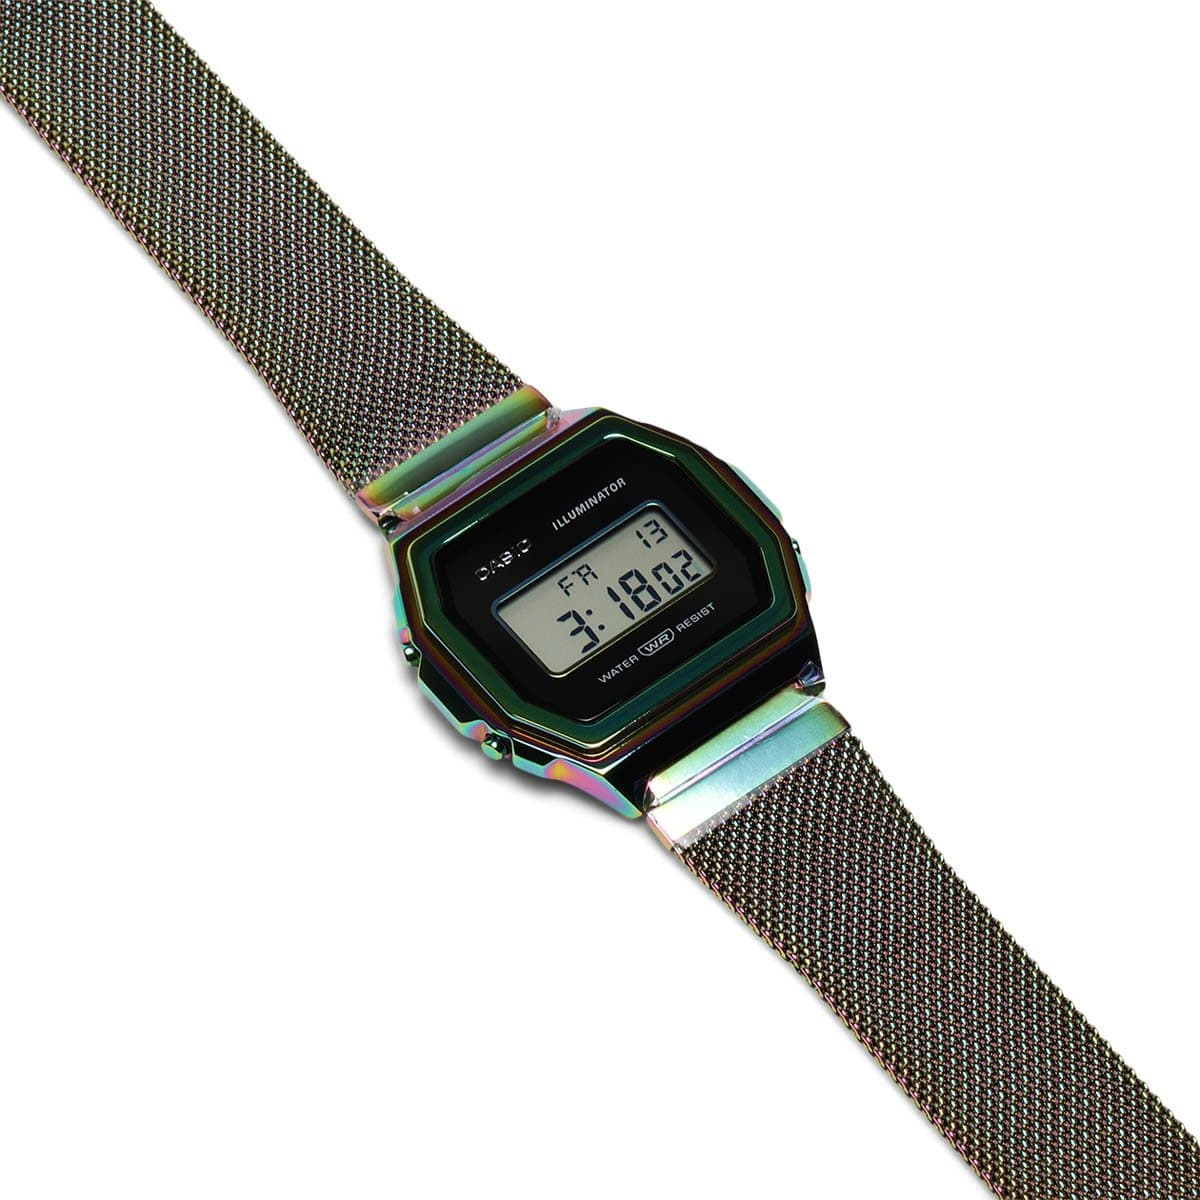 Casio Watches IRIDESCENT / O/S A1000RBW-1A